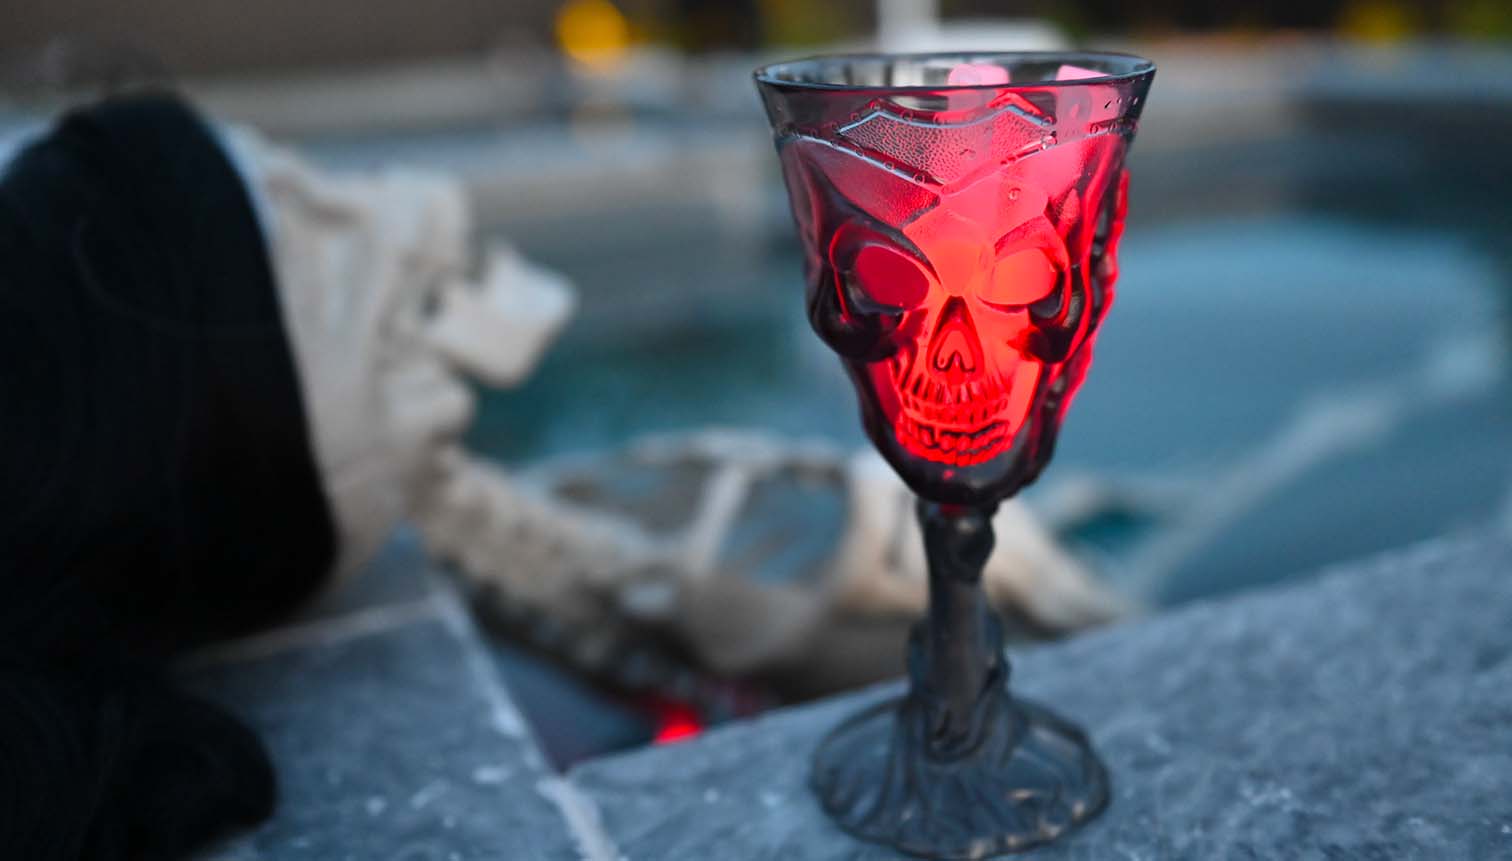 Poolside Halloween party decorating idea